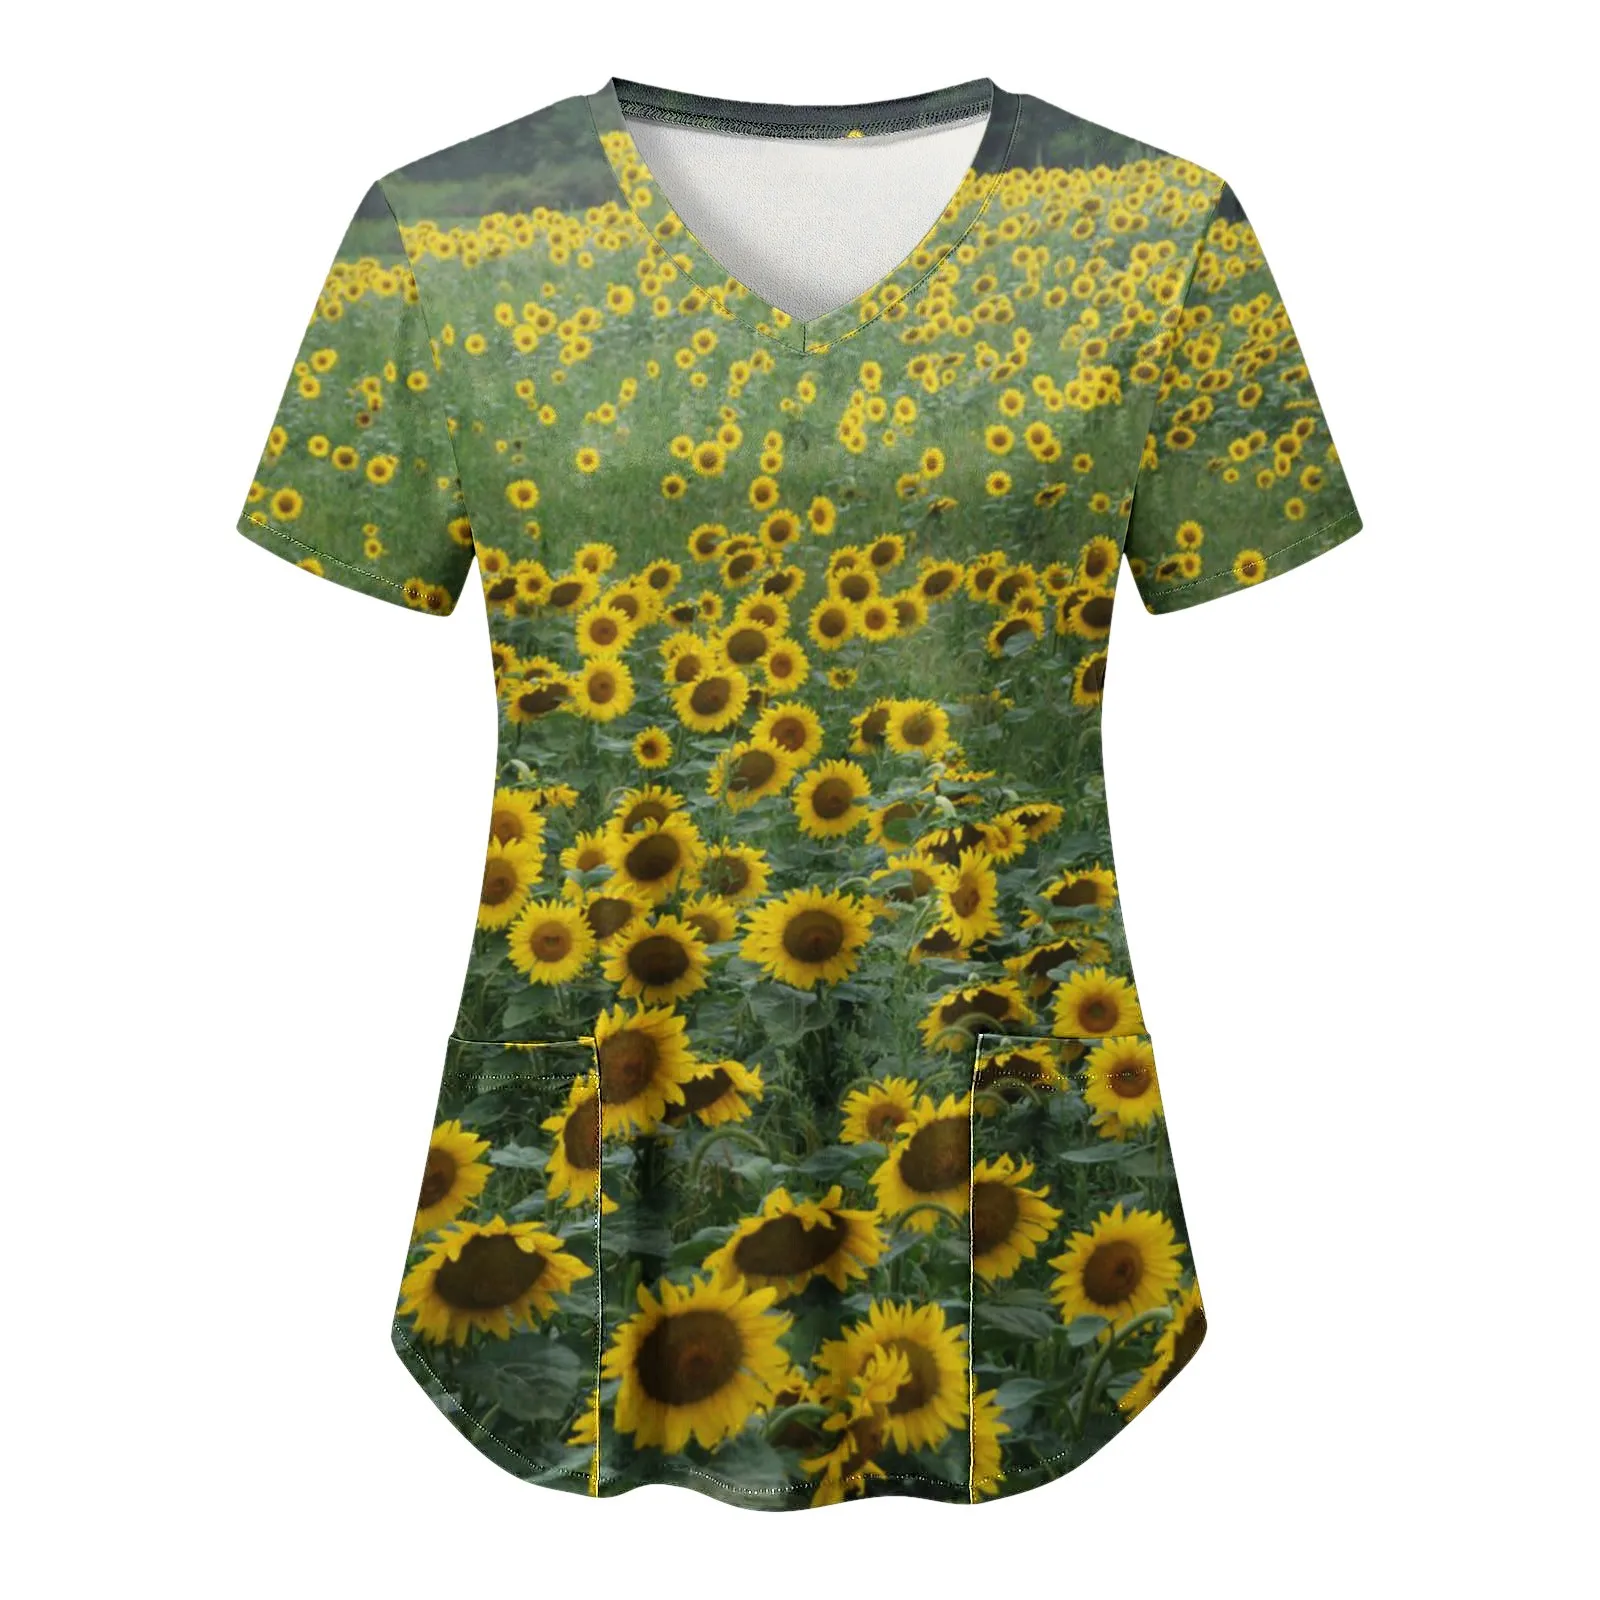 

Laides Fashion Floral Printed Short Sleeve V Neck Nurse Uniforms Tops with Pocket Scrubs Costume Top Workwear Working T-shirts